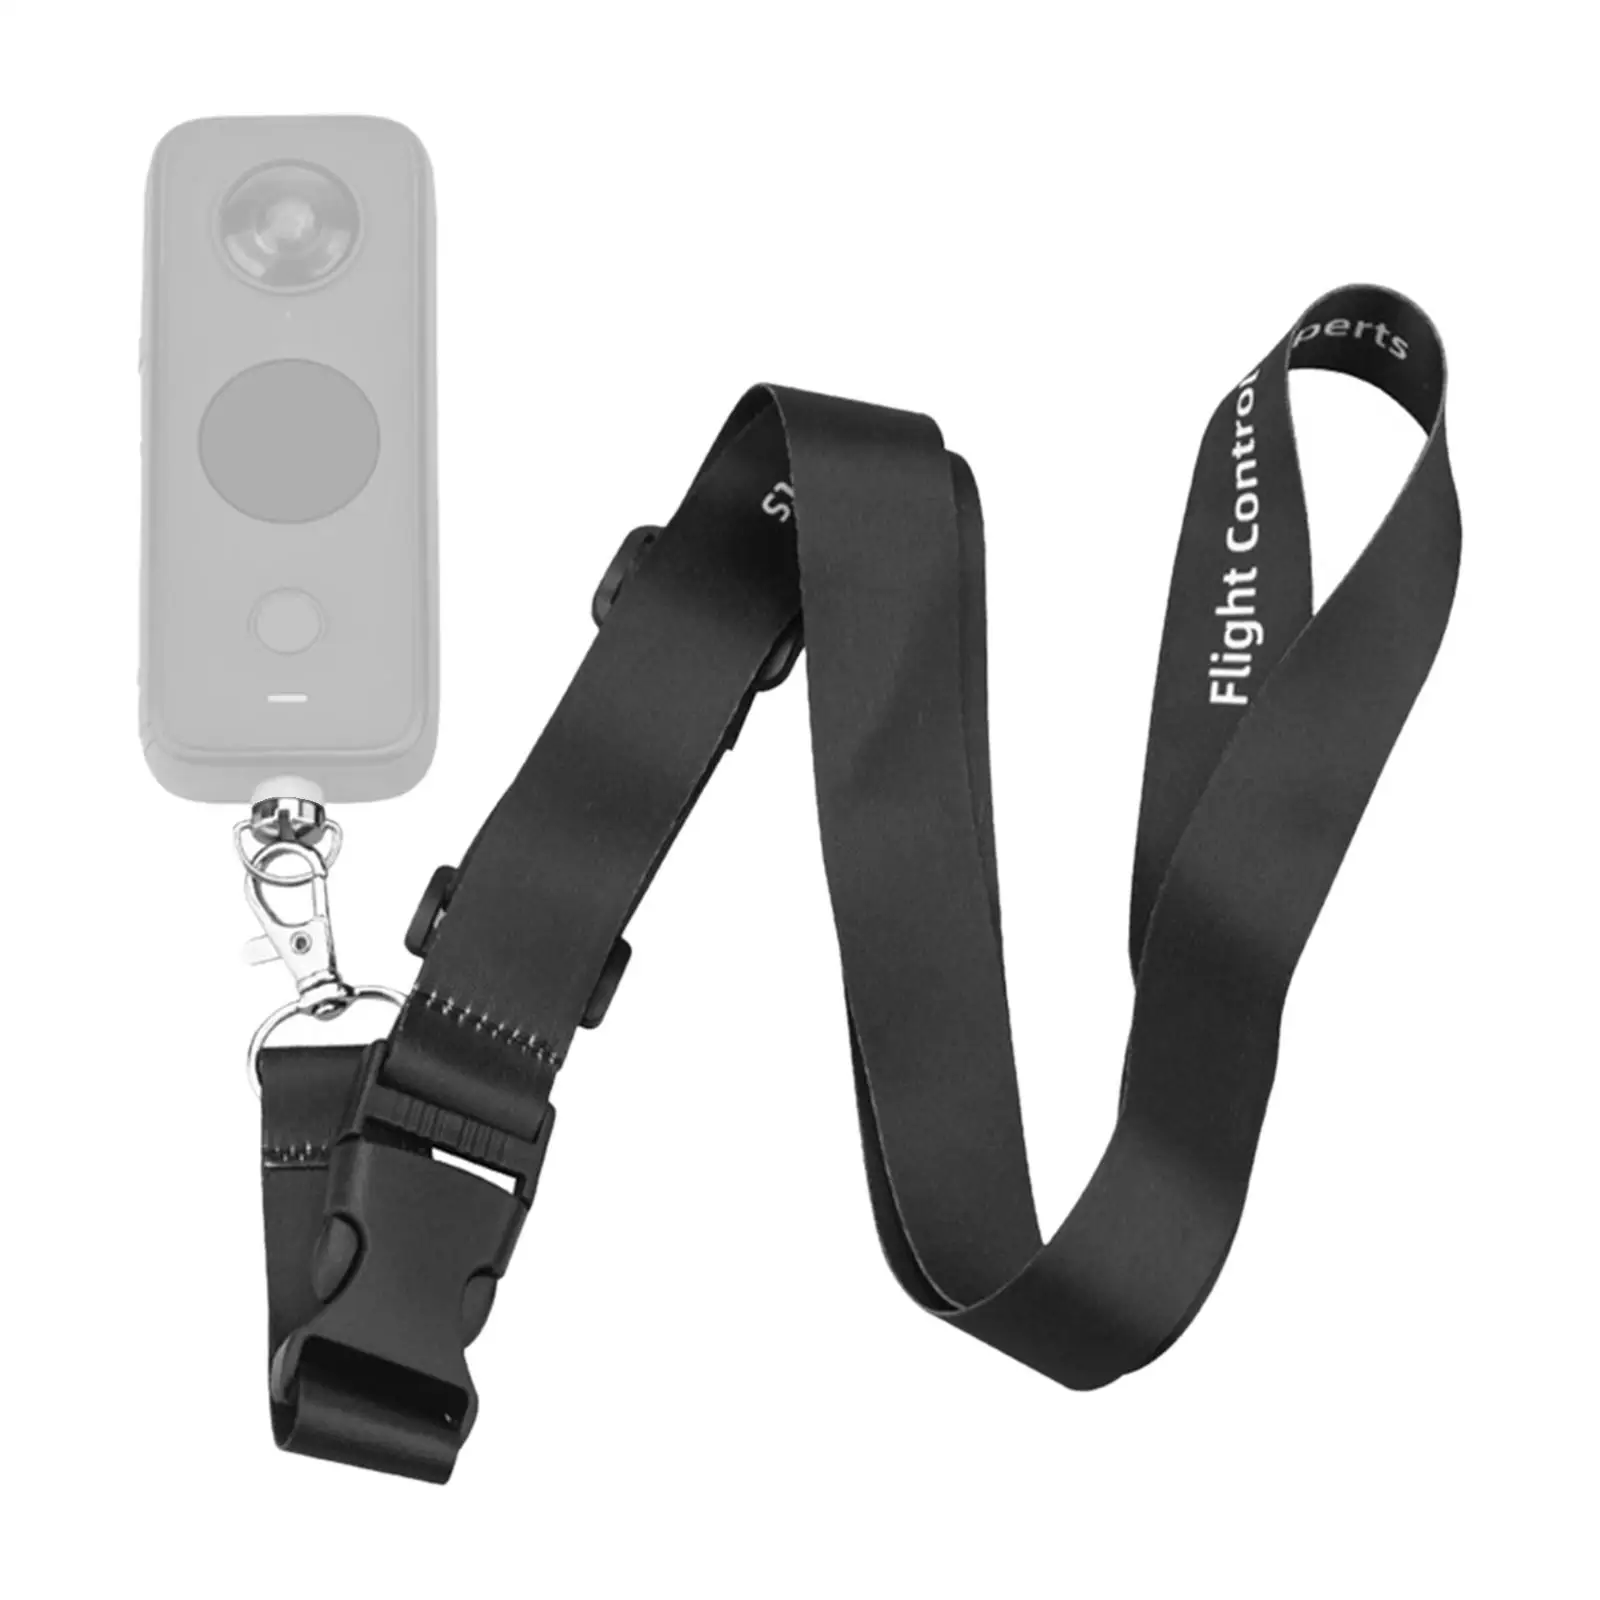 Neck Strap Lanyard Replacement Quick Release Detachable Adjustable Widen Anti Lost Rope for One x3 x2 Accessory